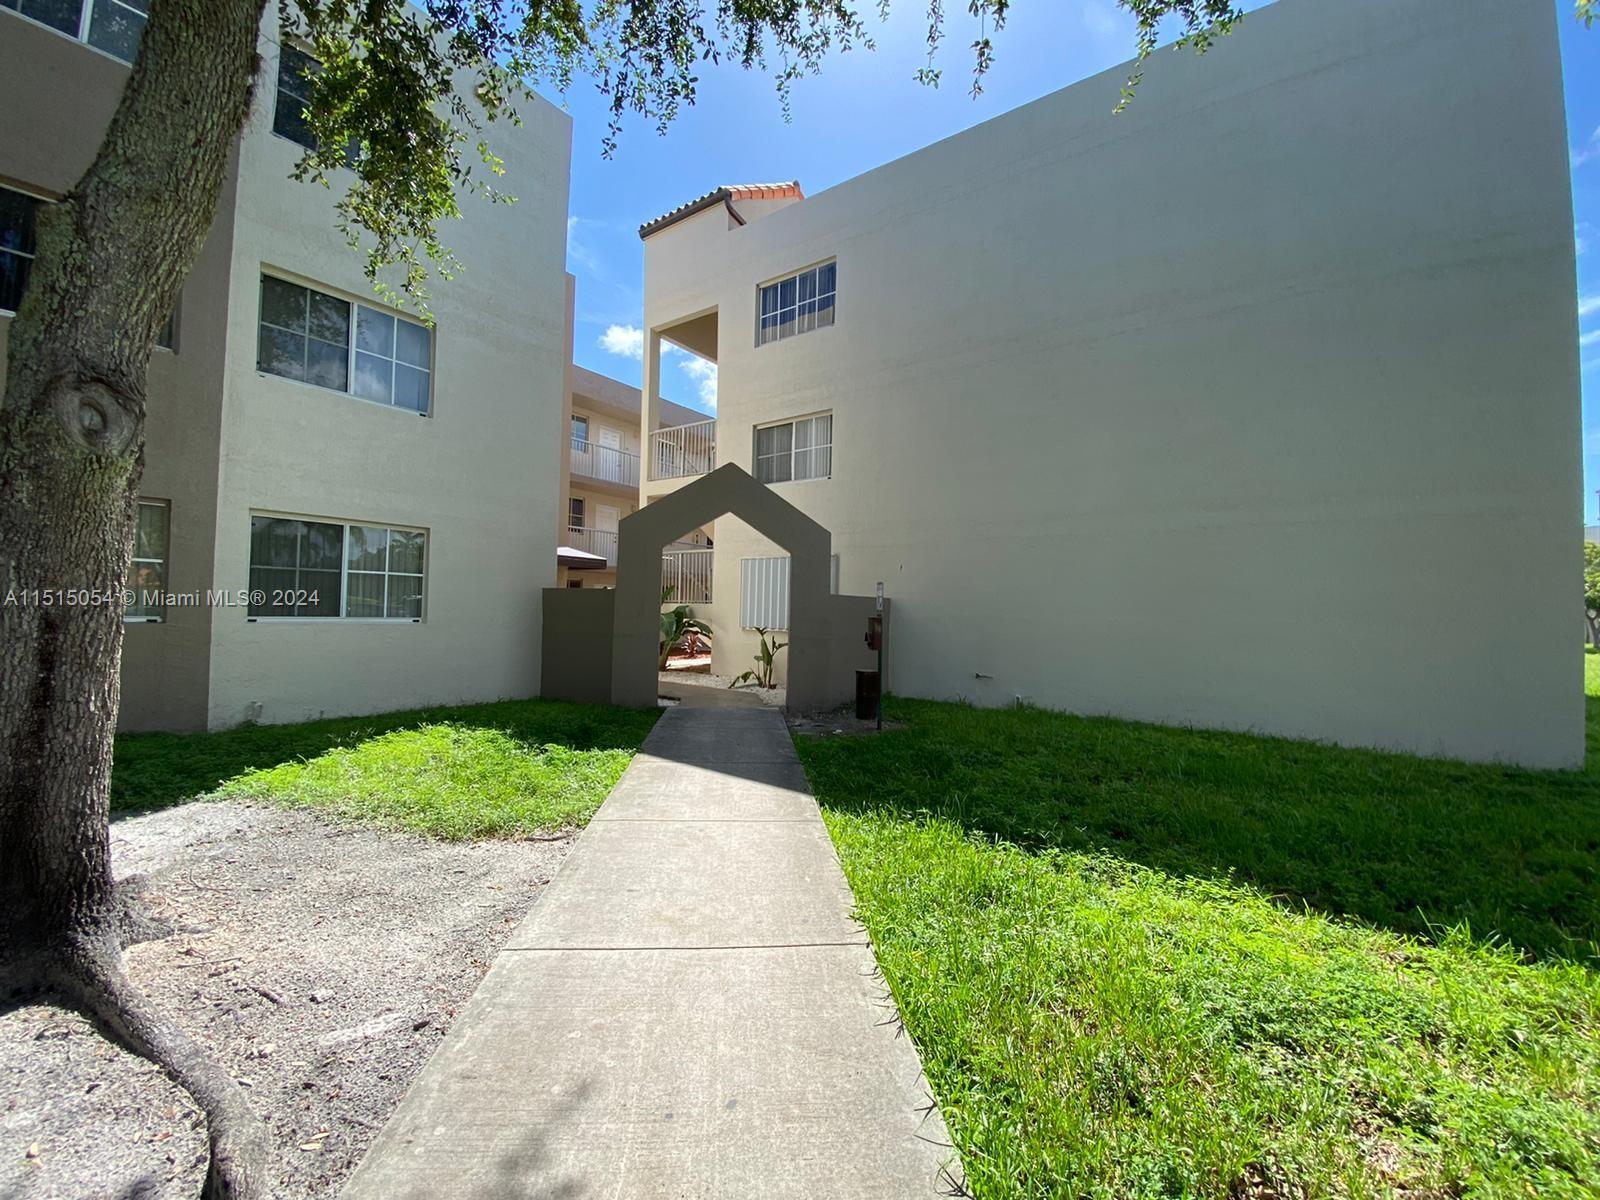 Photo of 6175 NW 186th St #209 in Hialeah, FL